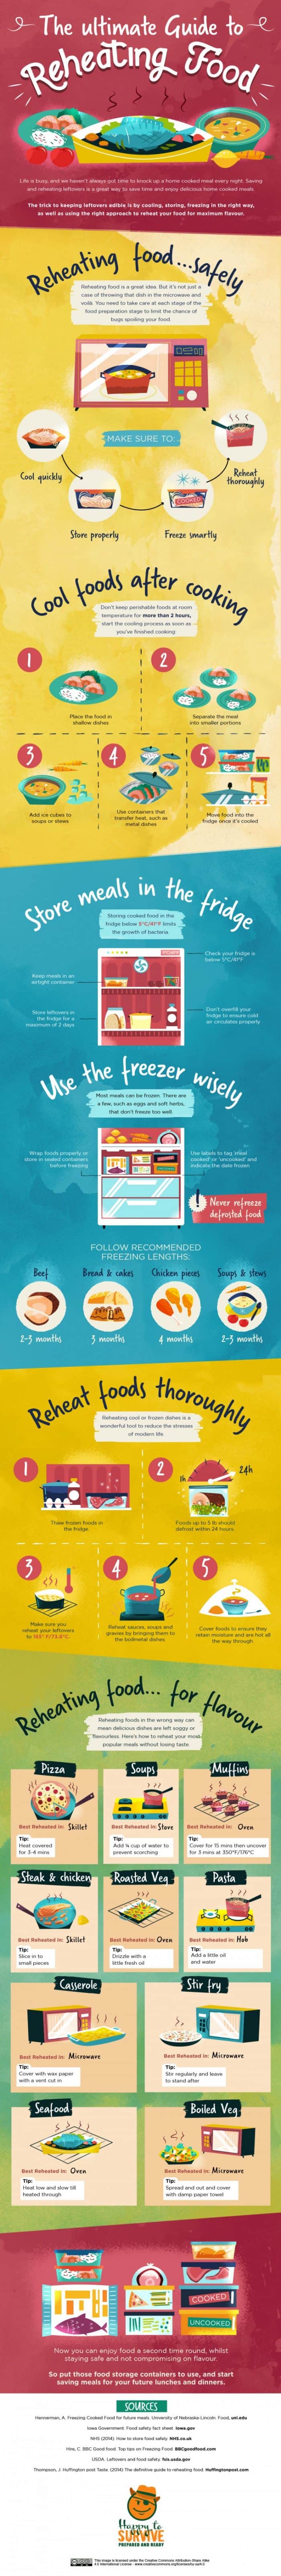 Ultimate Guide to Reheating Food Infographic